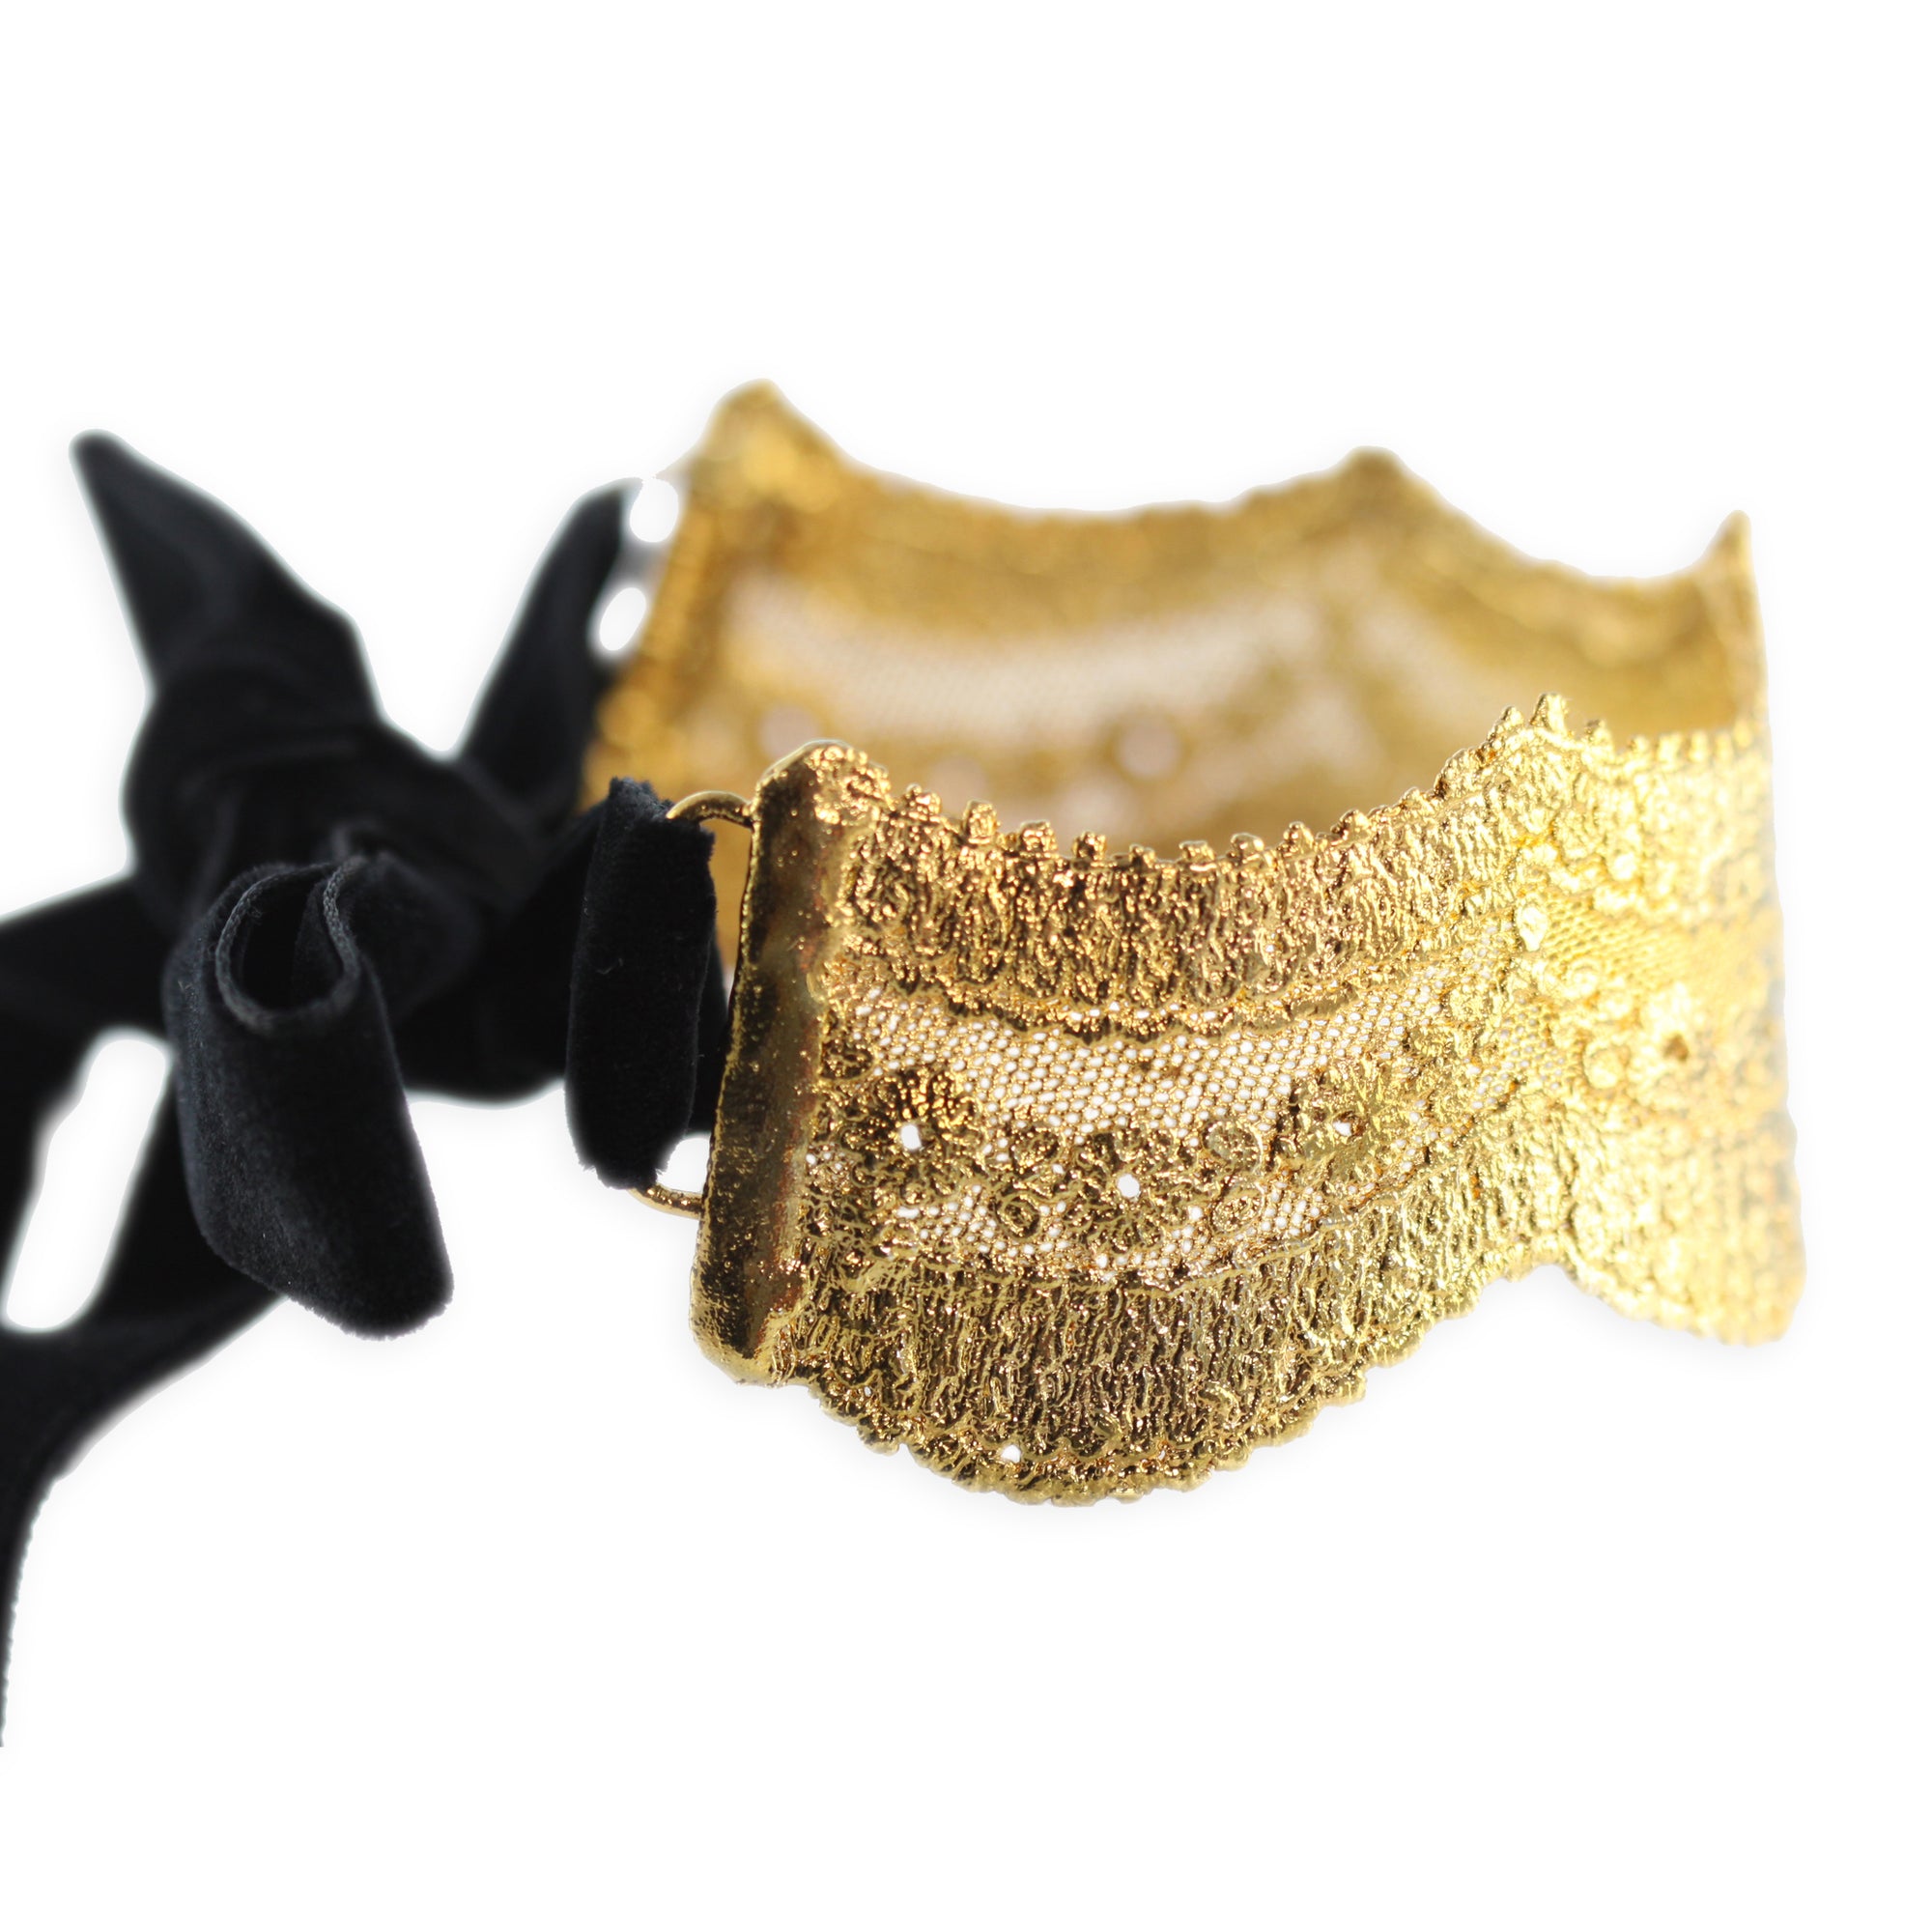 Rare lace choker in 24k gold with velvet tie.